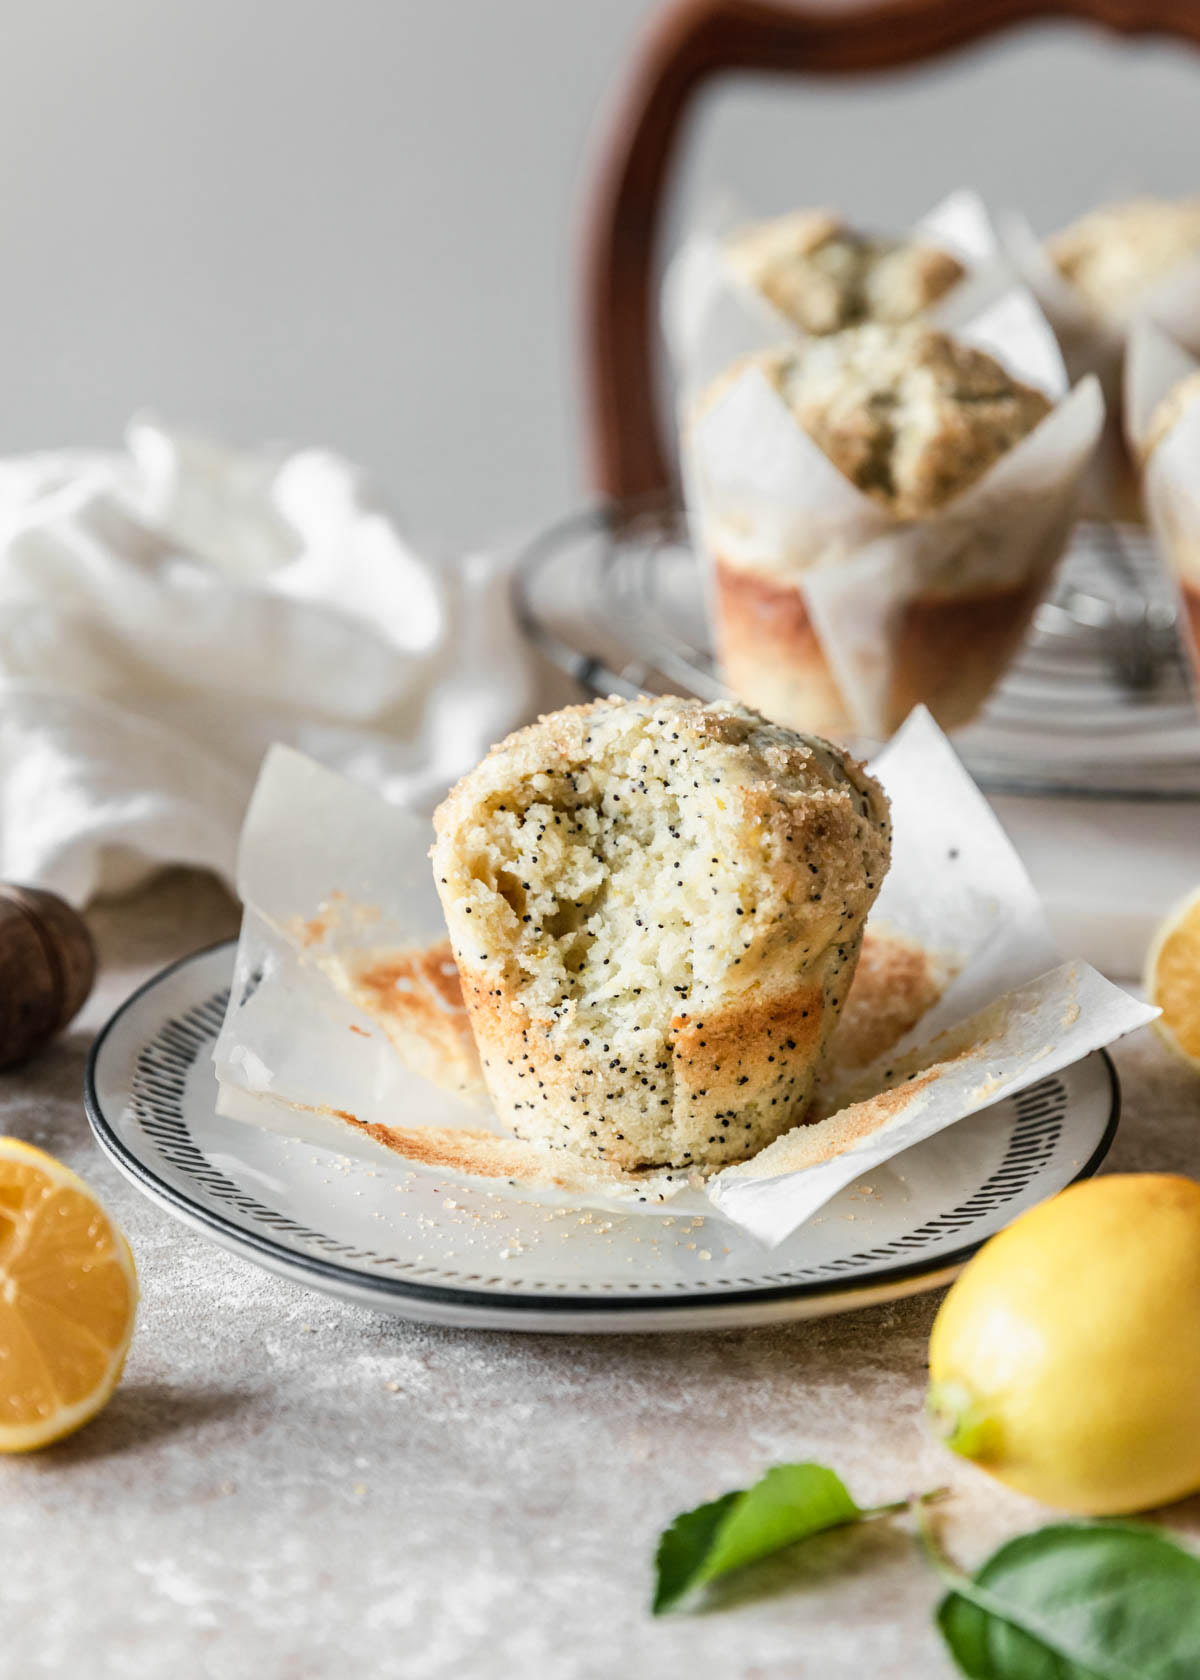 A close shot of a ricotta lemon poppy seed muffin with a bite taken out of it on a white plate with more muffins and lemons in the background on a beige table.